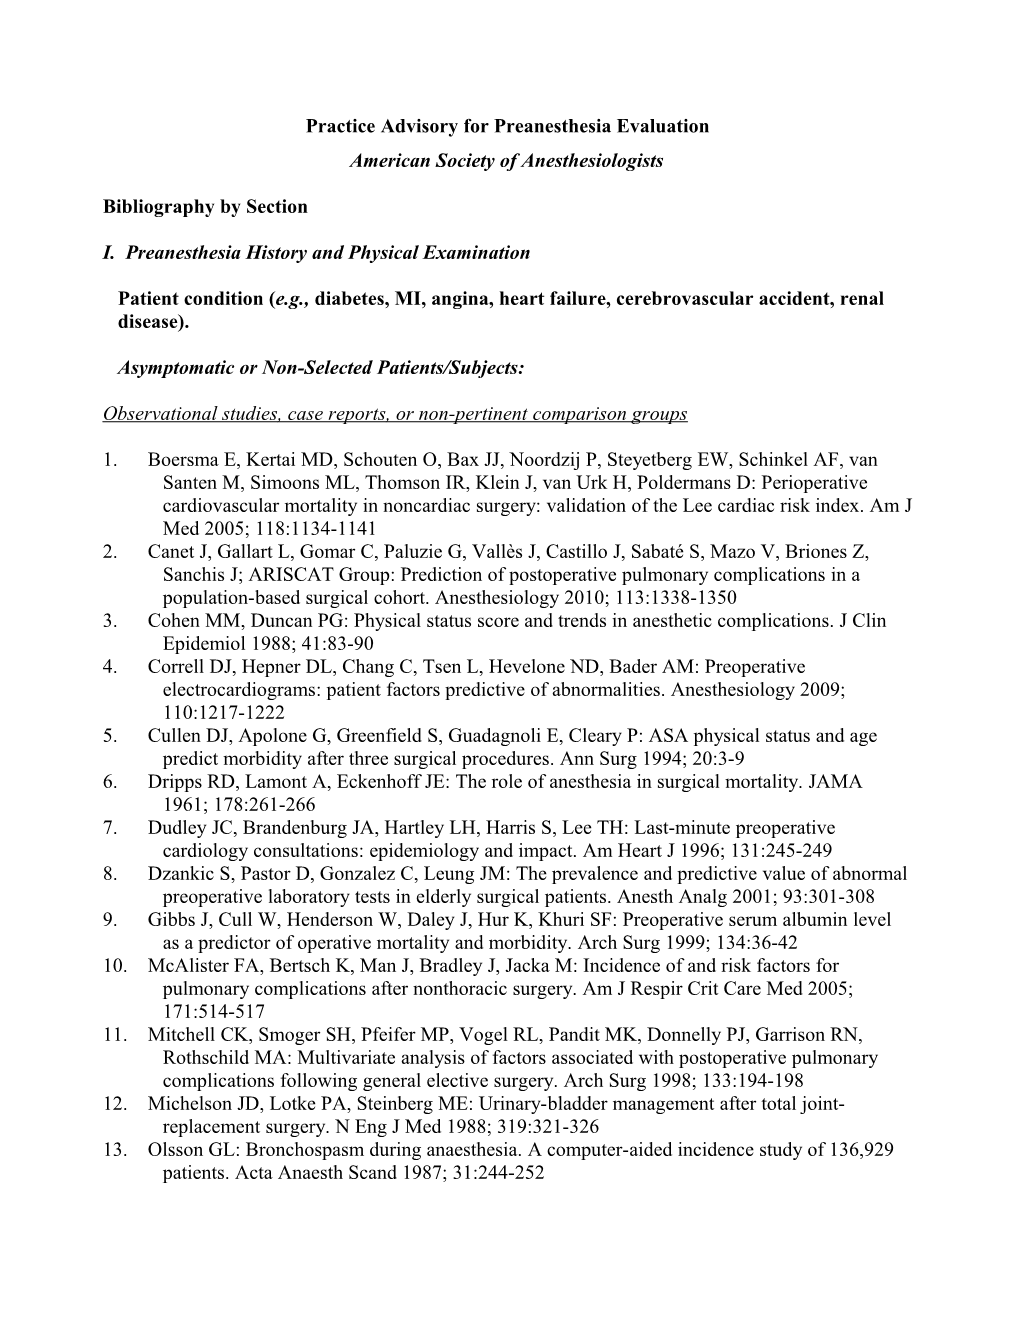 Preanesthesia Evaluation Bibliography